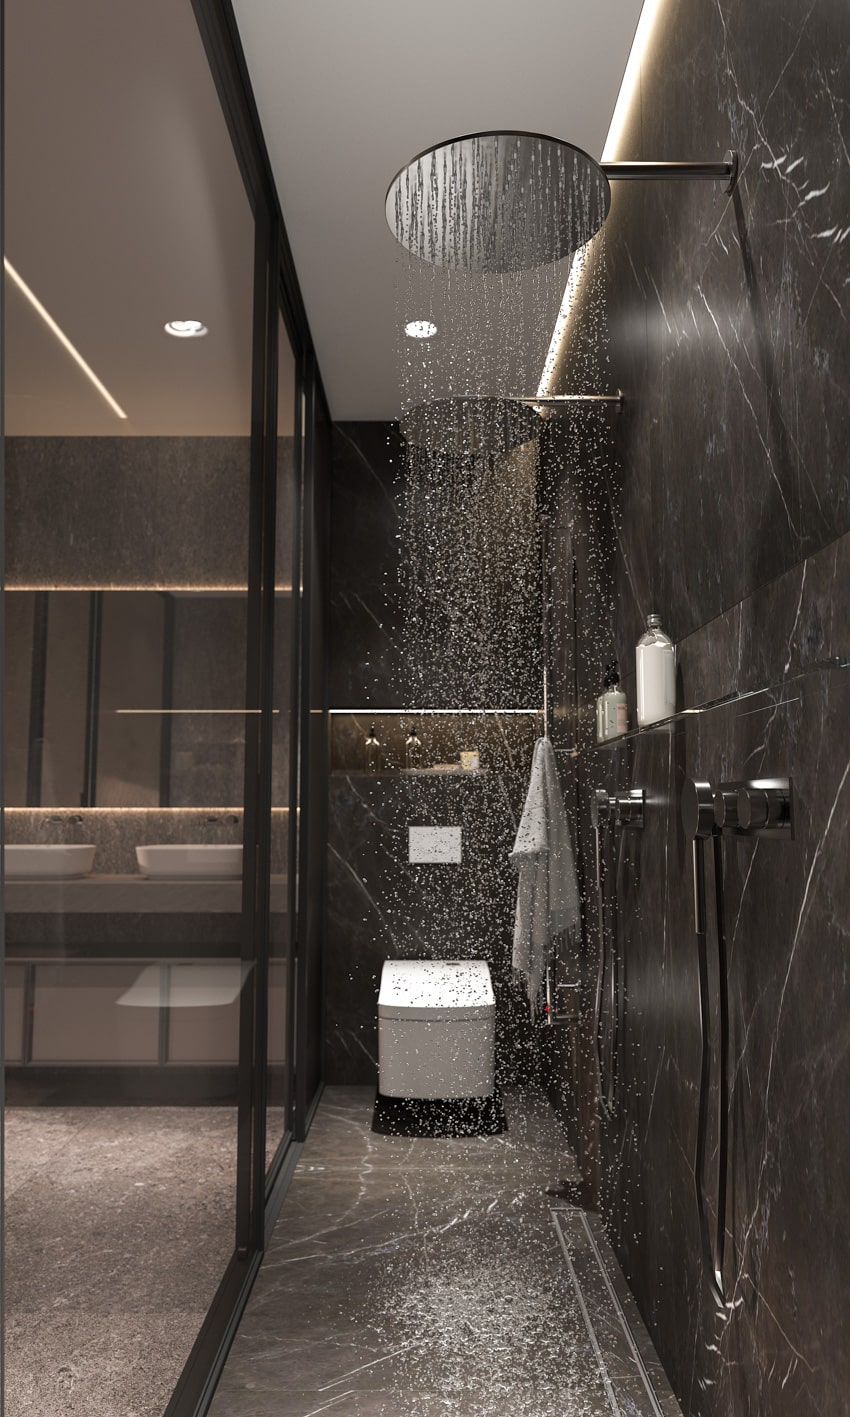 Rainfall shower with black soapstone floor and wall tiles